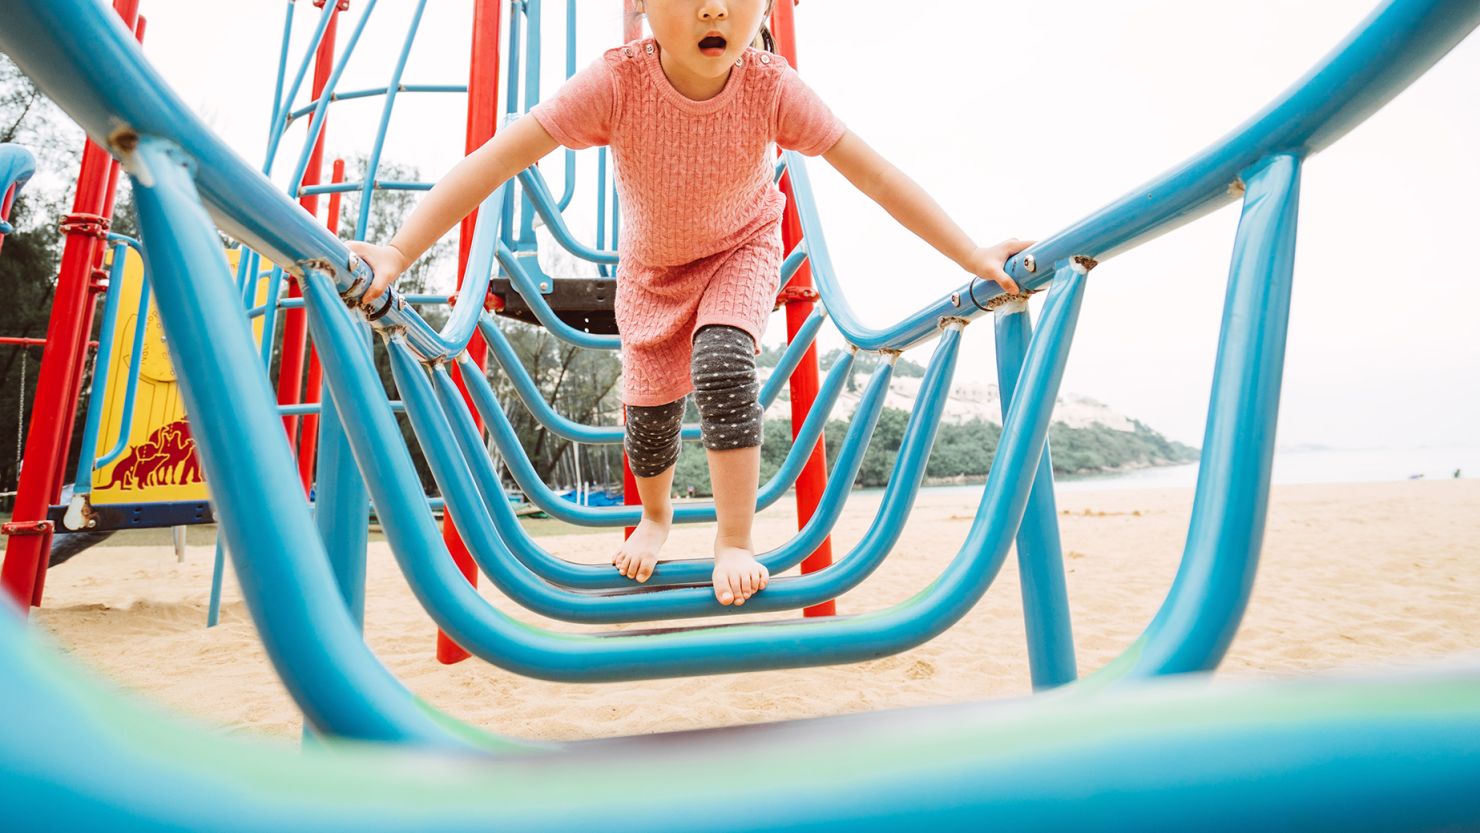 Playgrounds can help children develop physical and social skills so parents and guardians should be prepared when their kids try out new equipment at the park.